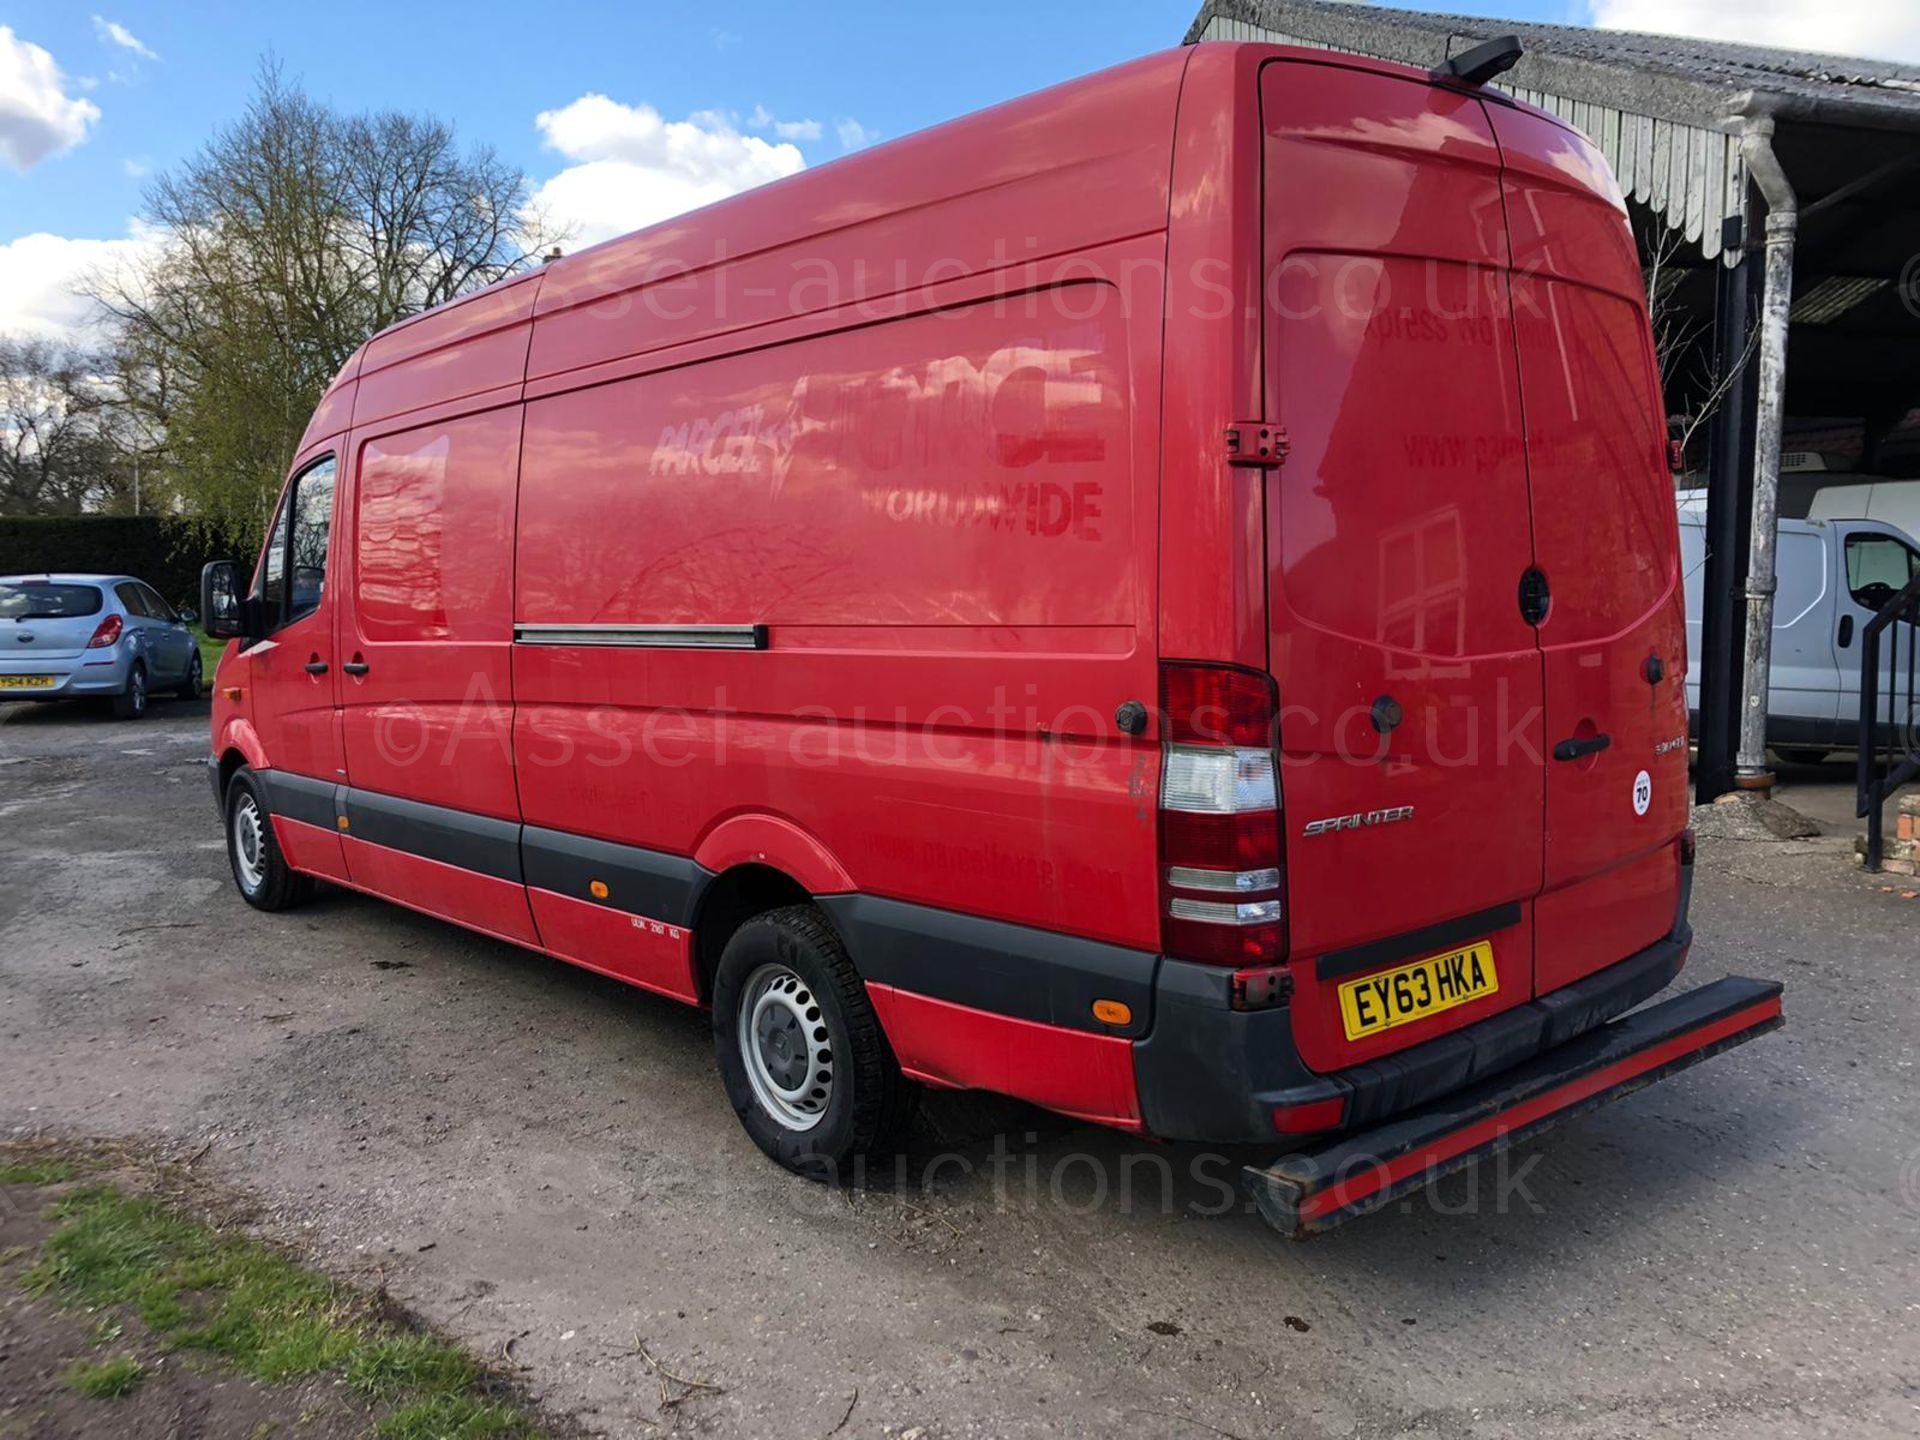 2013 MERCEDES-BENZ SPRINTER 310 CDI, DIESEL ENGINE, SHOWING 0 PREVIOUS KEEPERS *PLUS VAT* - Image 5 of 12